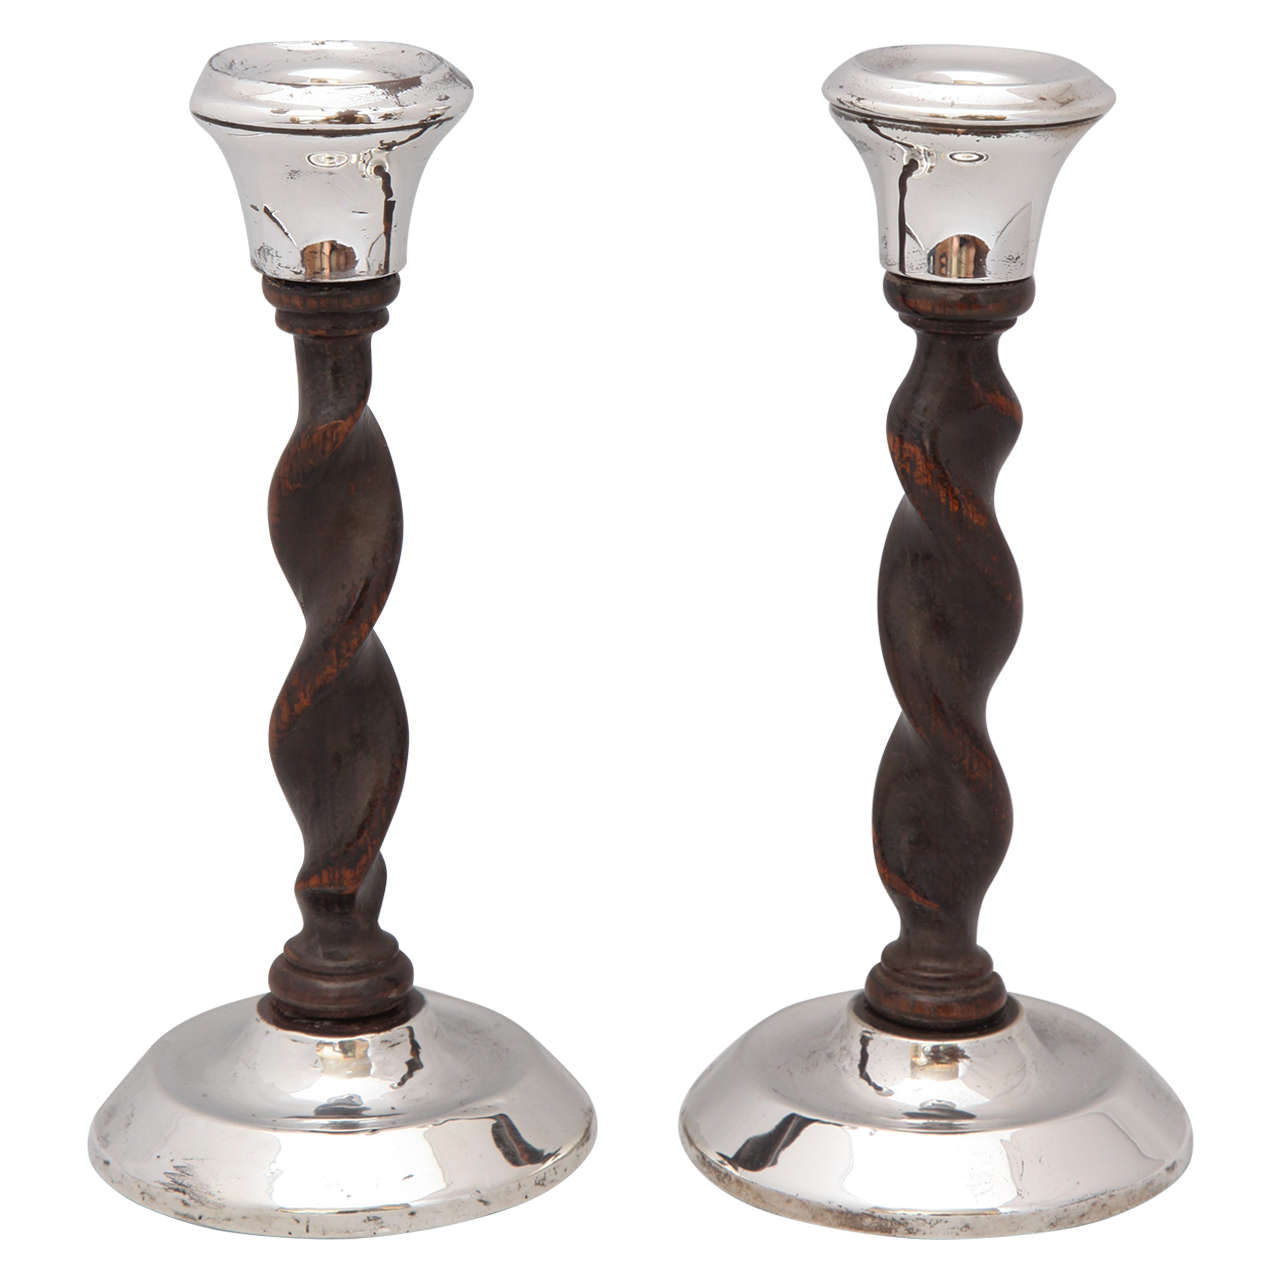 Art Deco, Jacobean-Style Sterling Silver and Barley Twist Wood Candlesticks